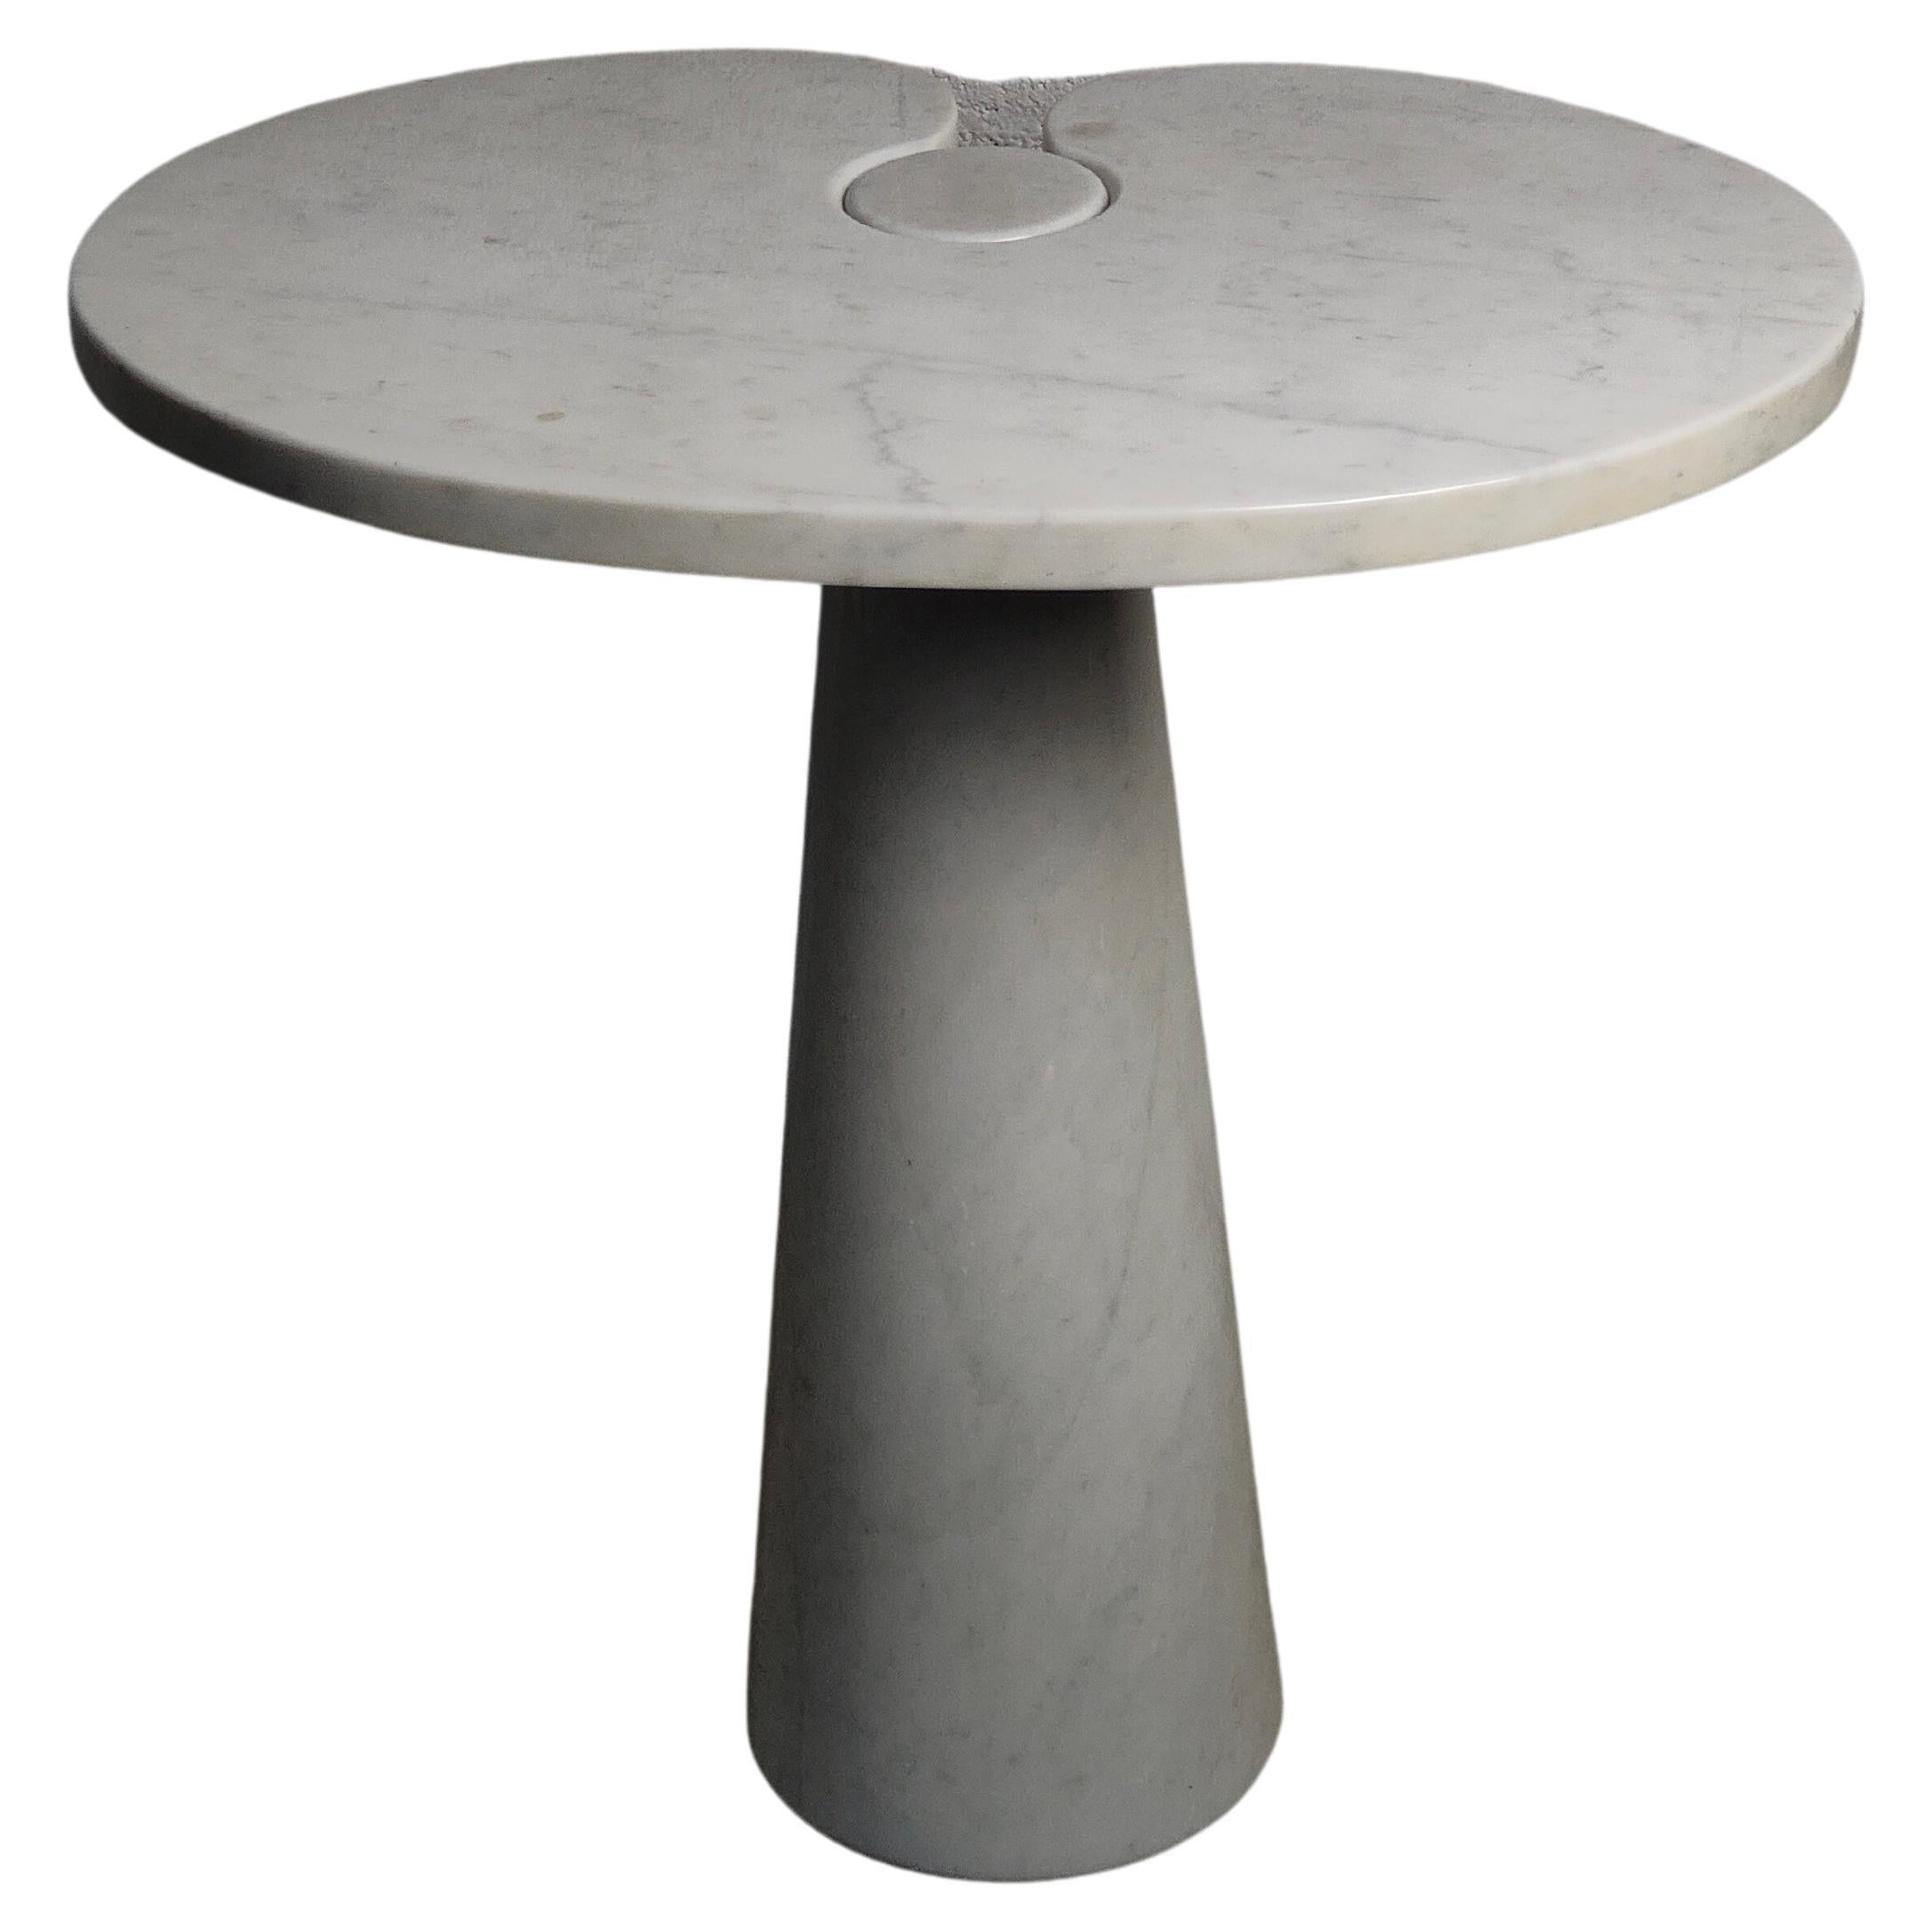 Mid-Century Modern Eros Carrara Marble Side Table by Angelo Mangiarotti for Skipper 70s